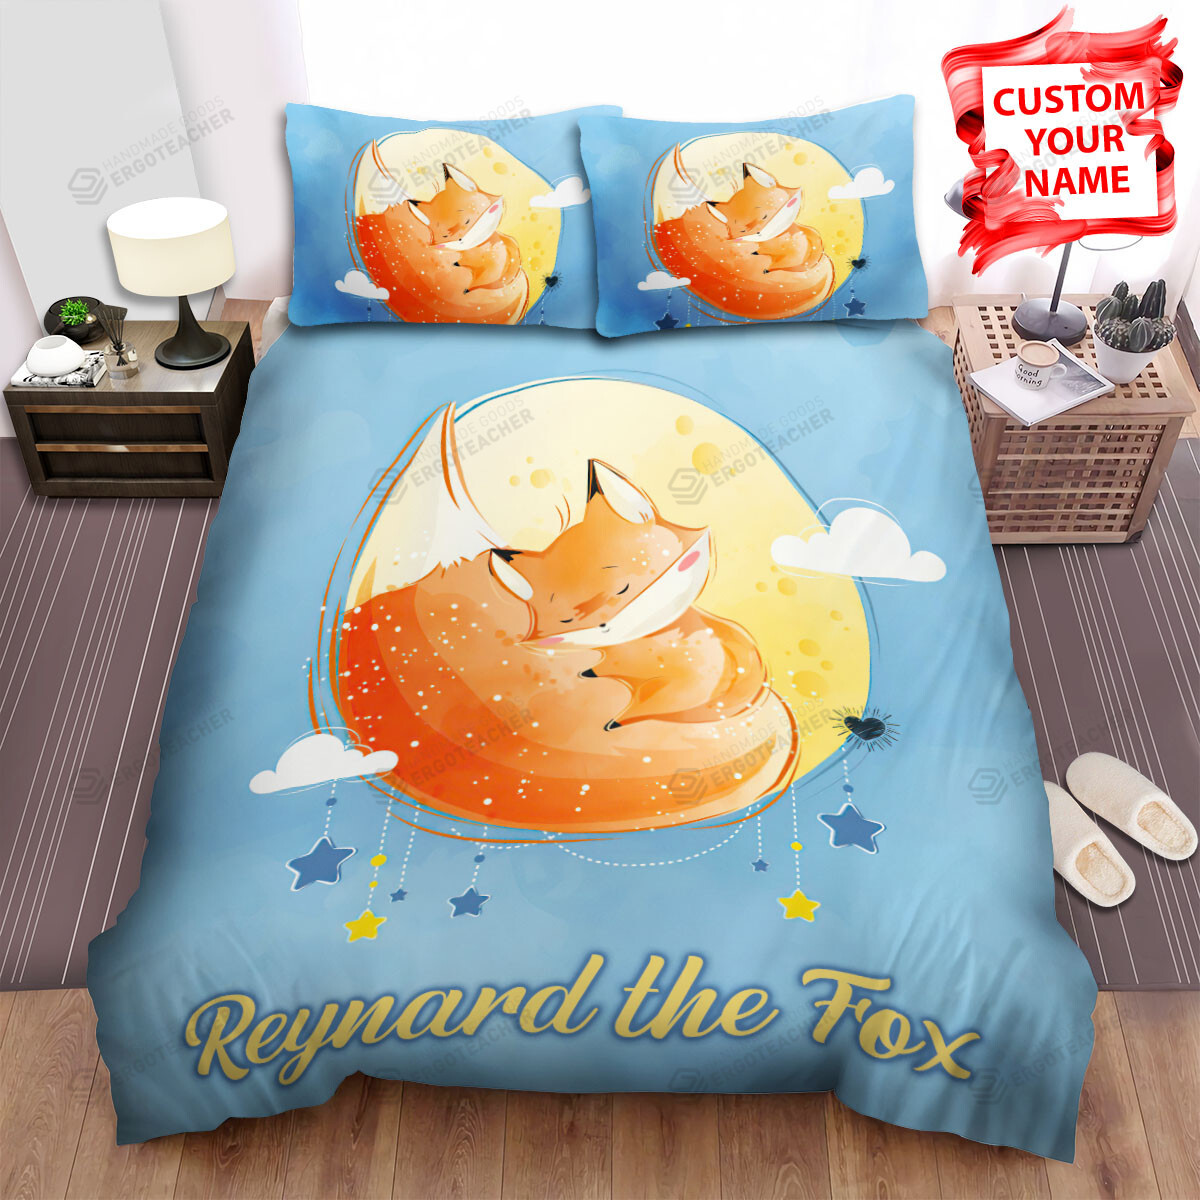 Personalized The Fox Sleeping Well Bed Sheets Spread Duvet Cover Bedding Sets